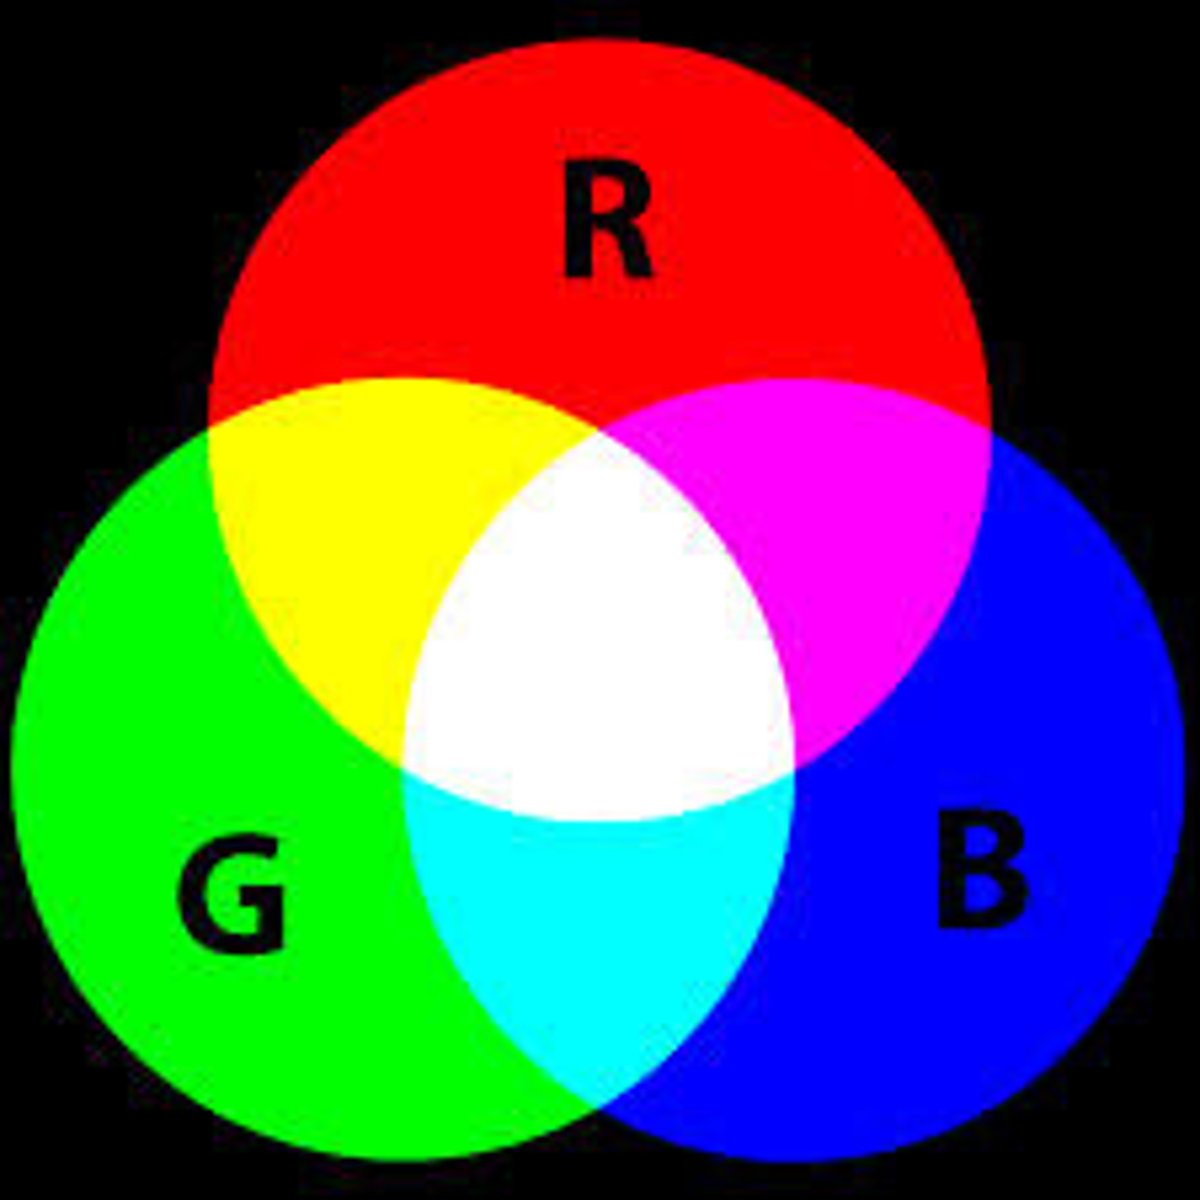 <p>the color model that uses varying intensities of (R)ed, (G)reen, and (B)lue light added together in order to reproduce a broad array of colors.</p>